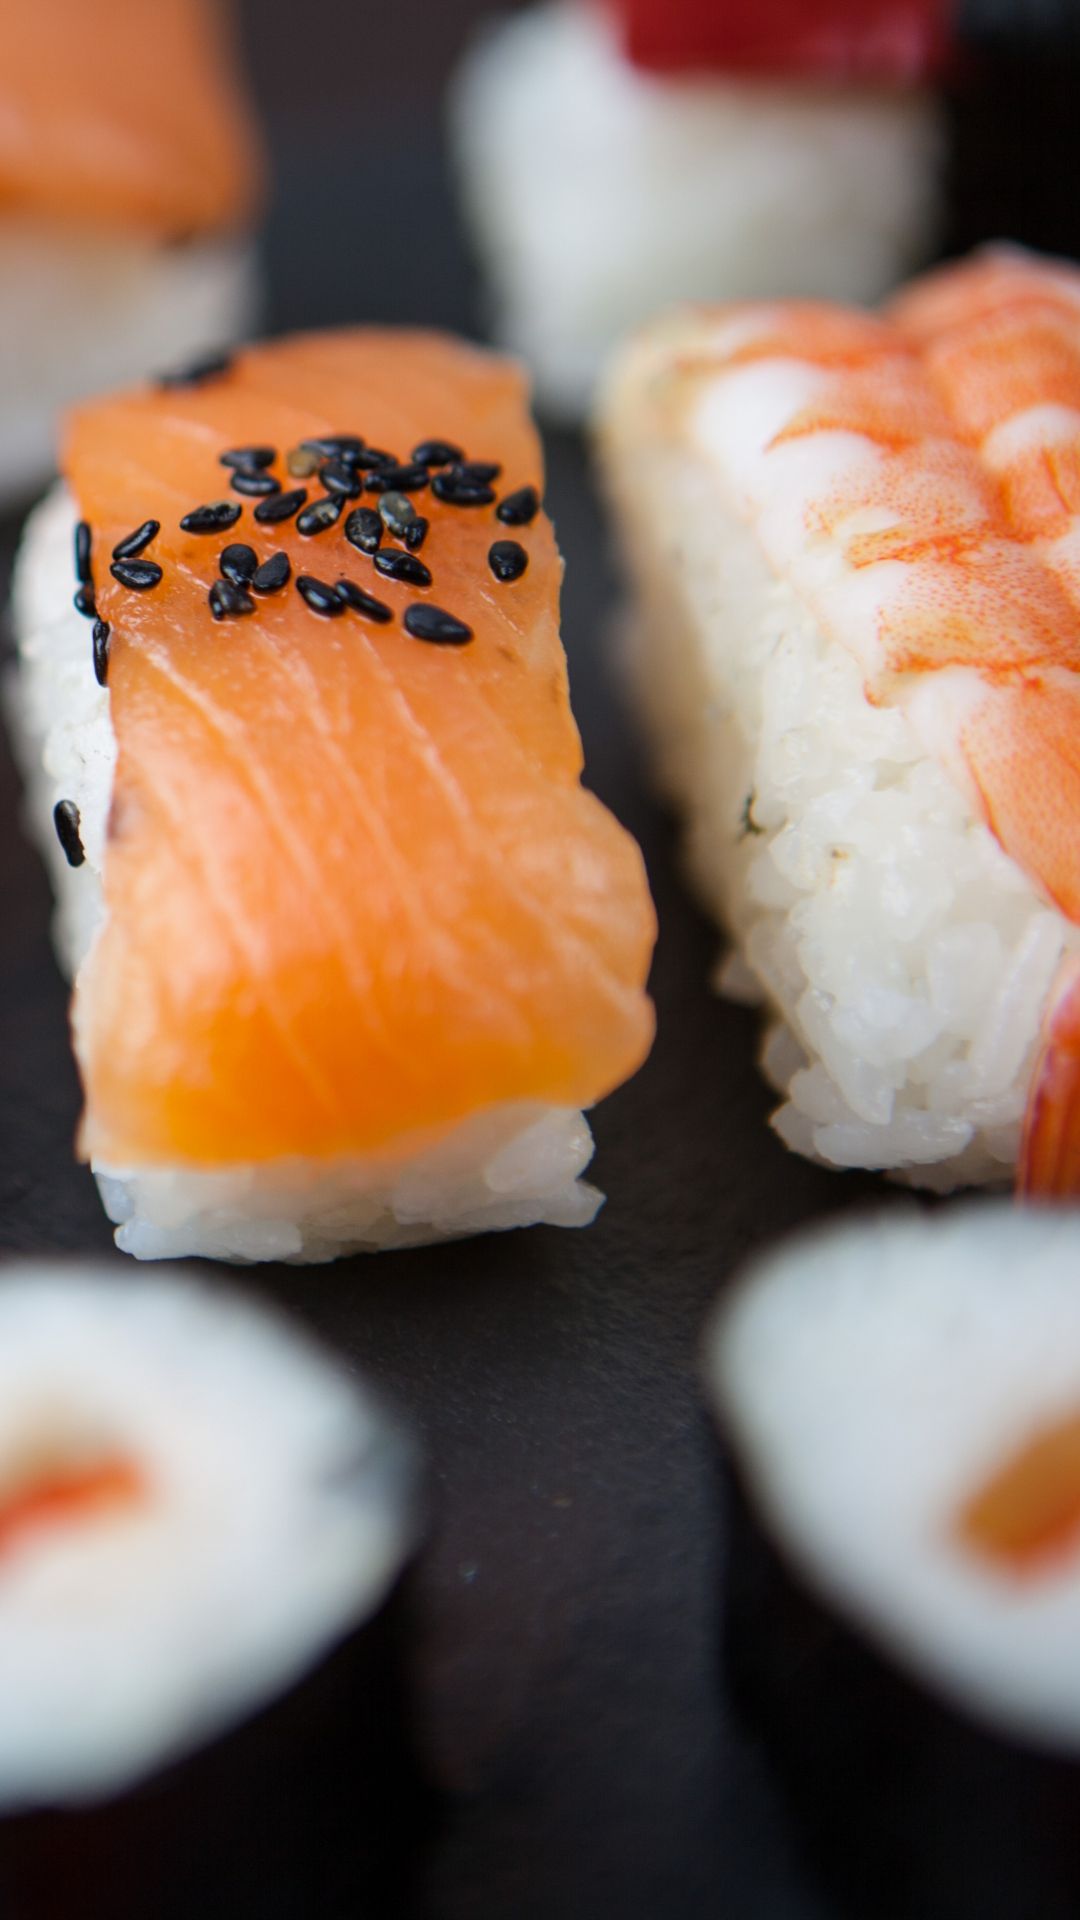 Sushi Rice Meat Seafood iPhone Wallpaper Food And Drink